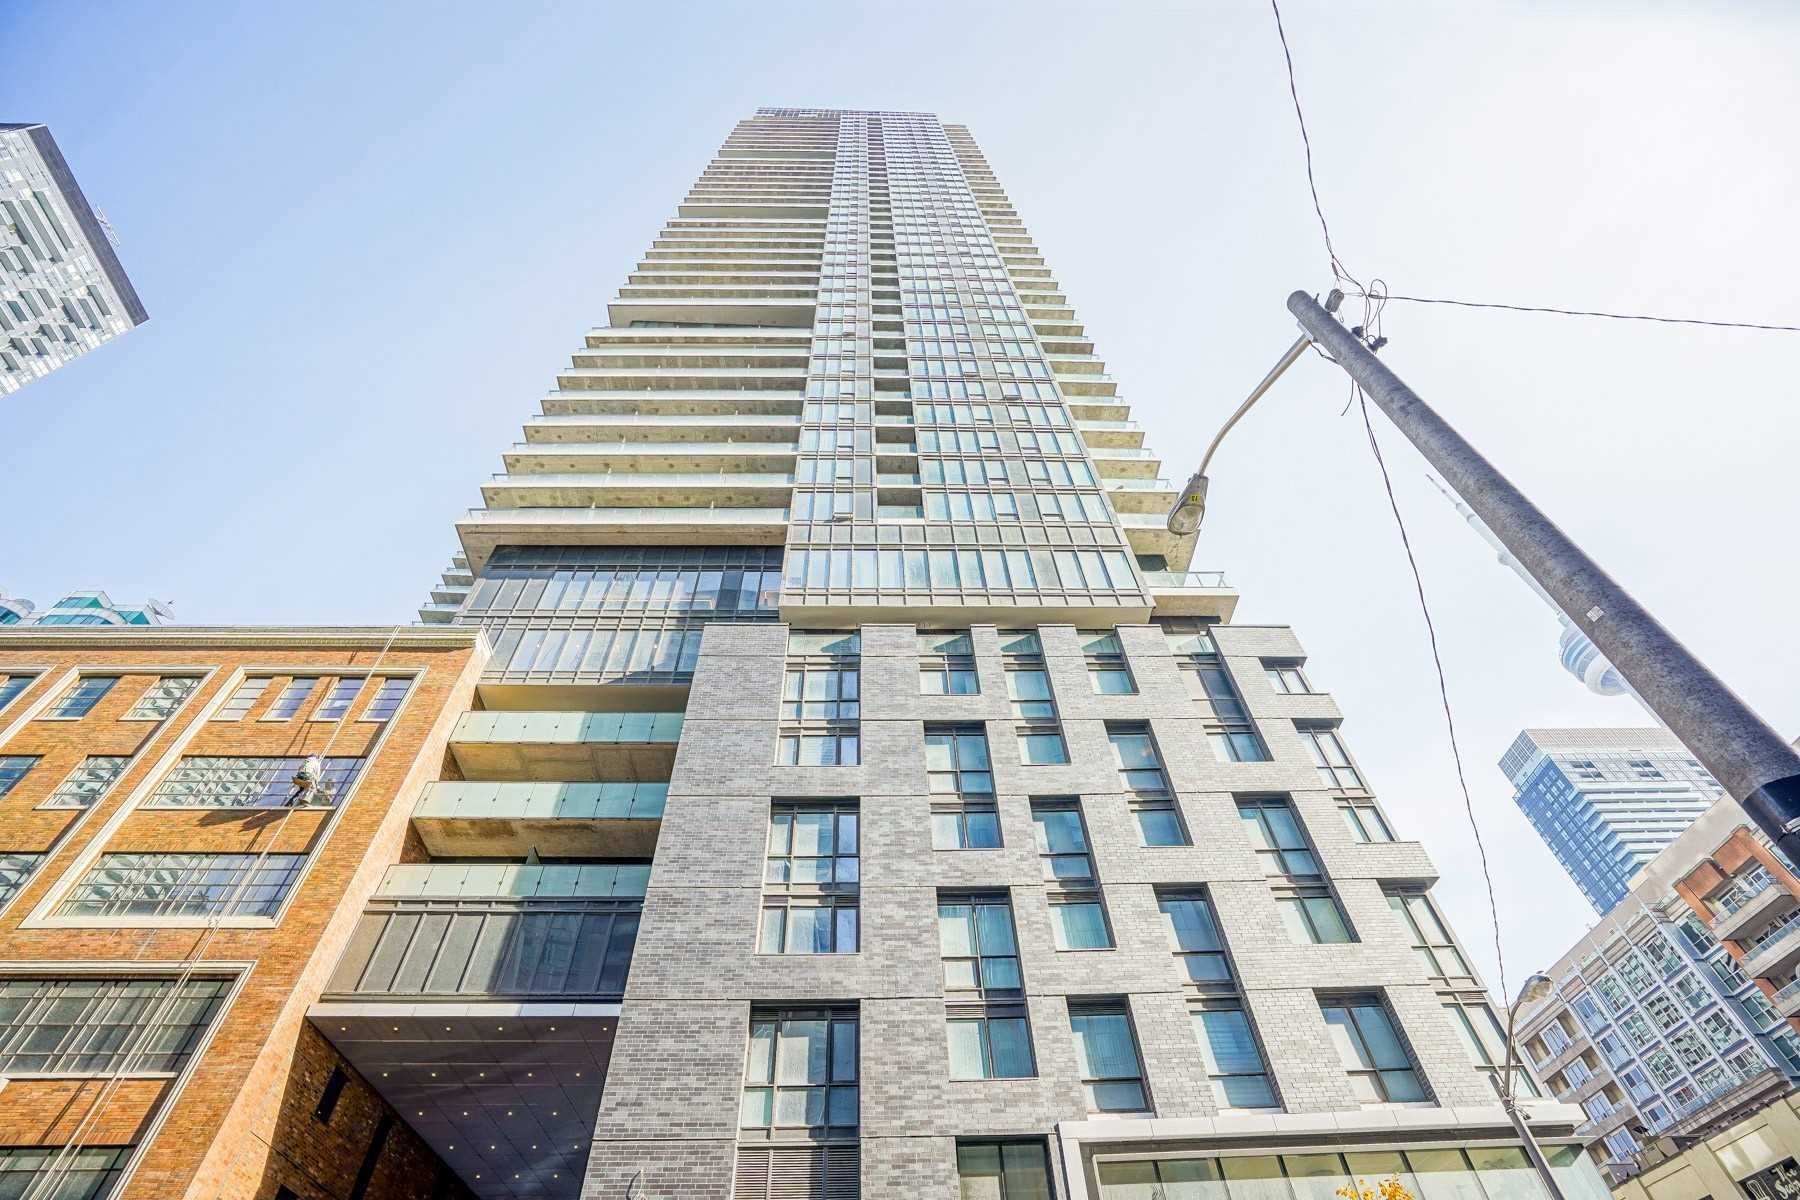 115-125 Blue Jays Way. This condo at King Blue Condos is located in  Downtown, Toronto - image #2 of 2 by Strata.ca